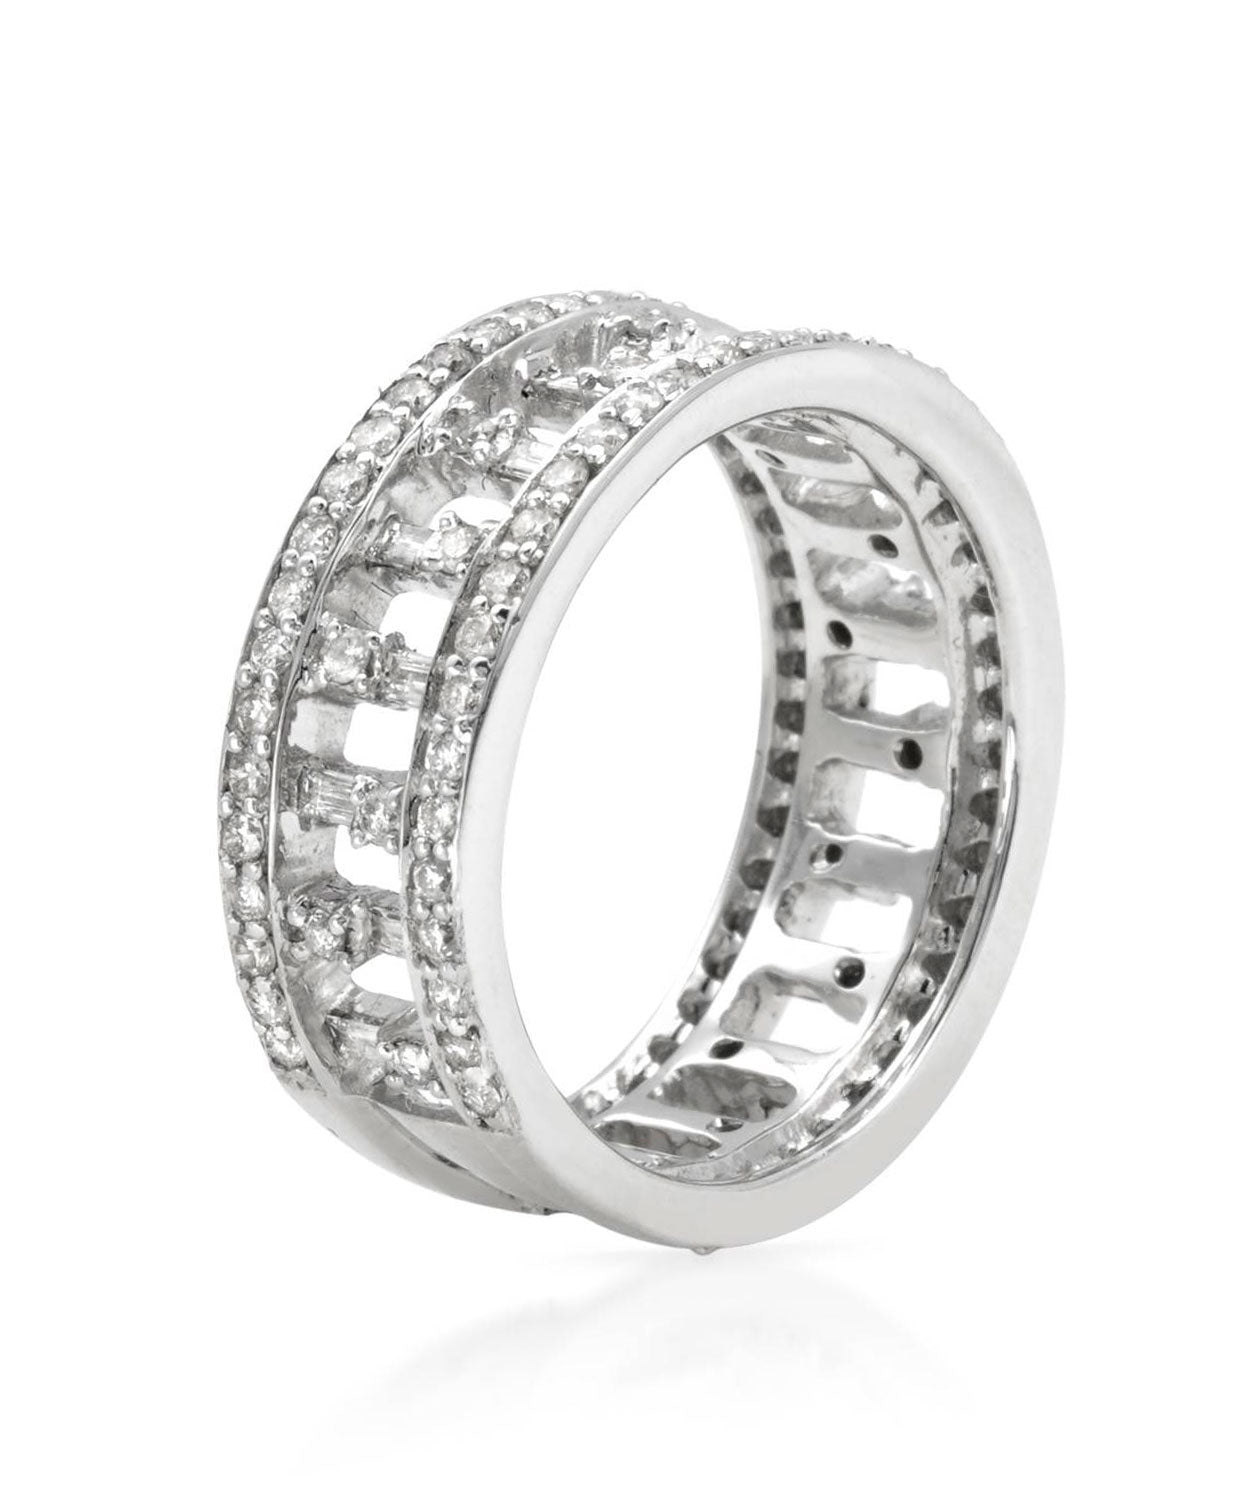 Glamour Collection 1.15 ctw Diamond 14k White Gold Fancy Eternity Band View 2